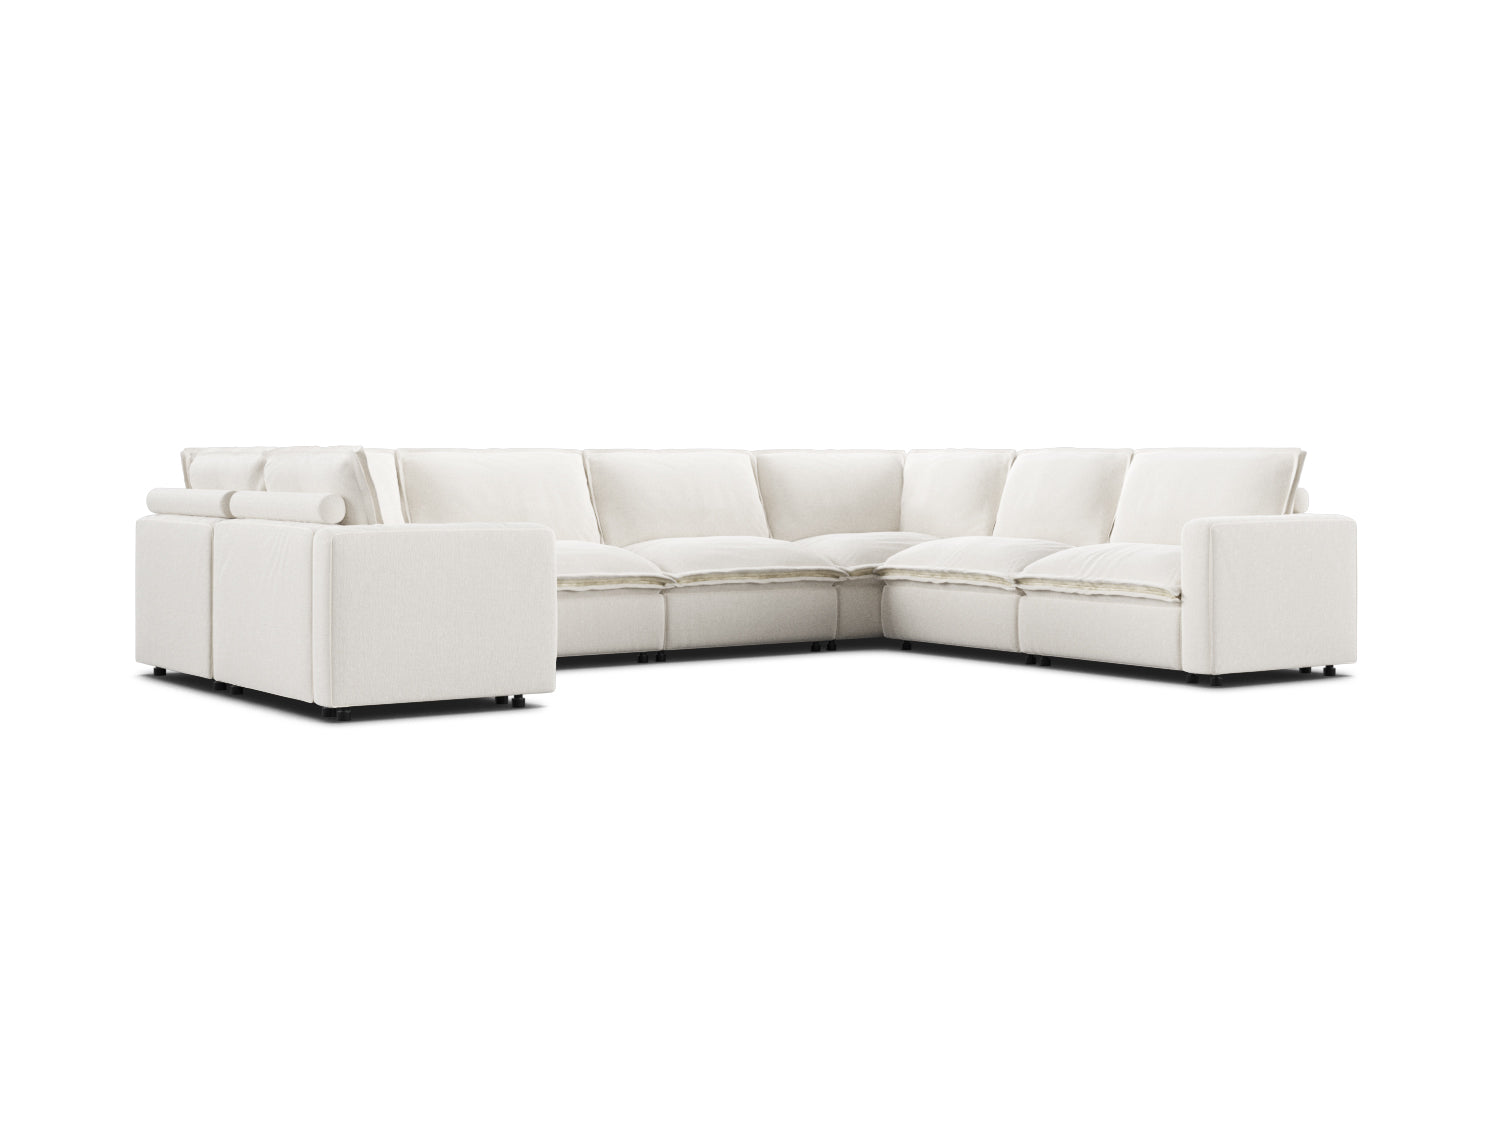 a sofa that forms a 'U' shape with its pieces.